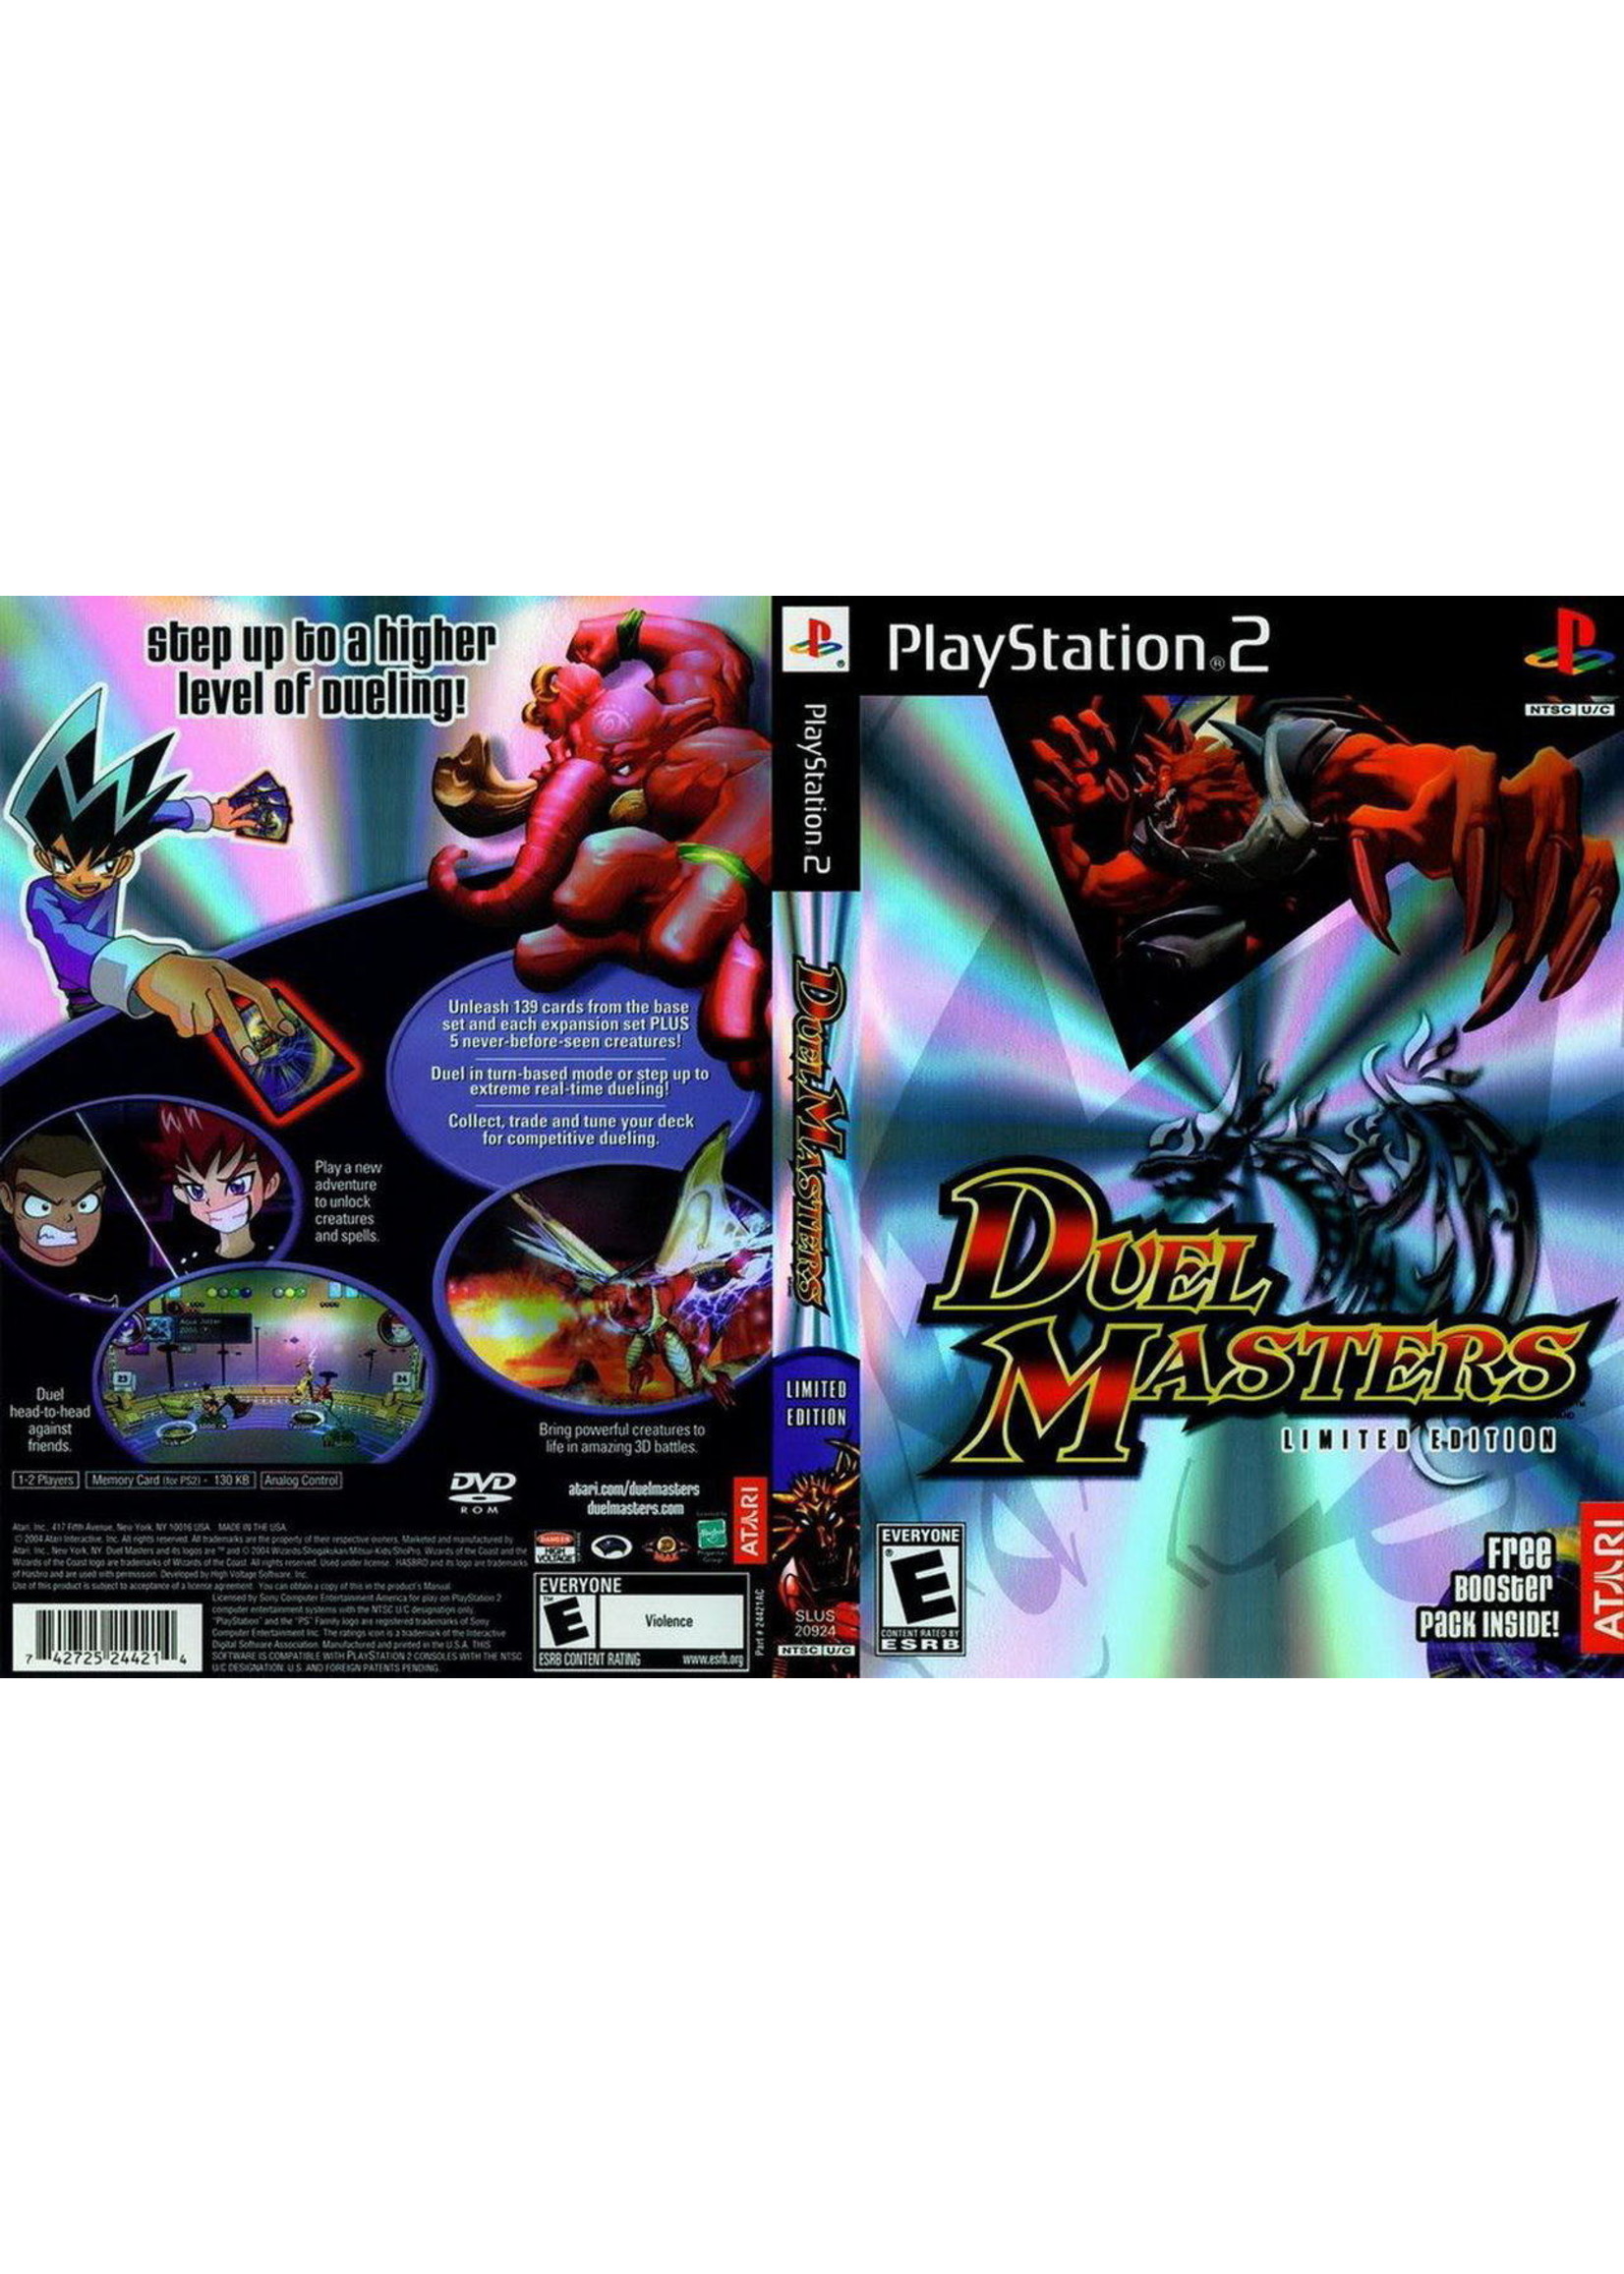 Sony Playstation 2 (PS2) Duel Masters